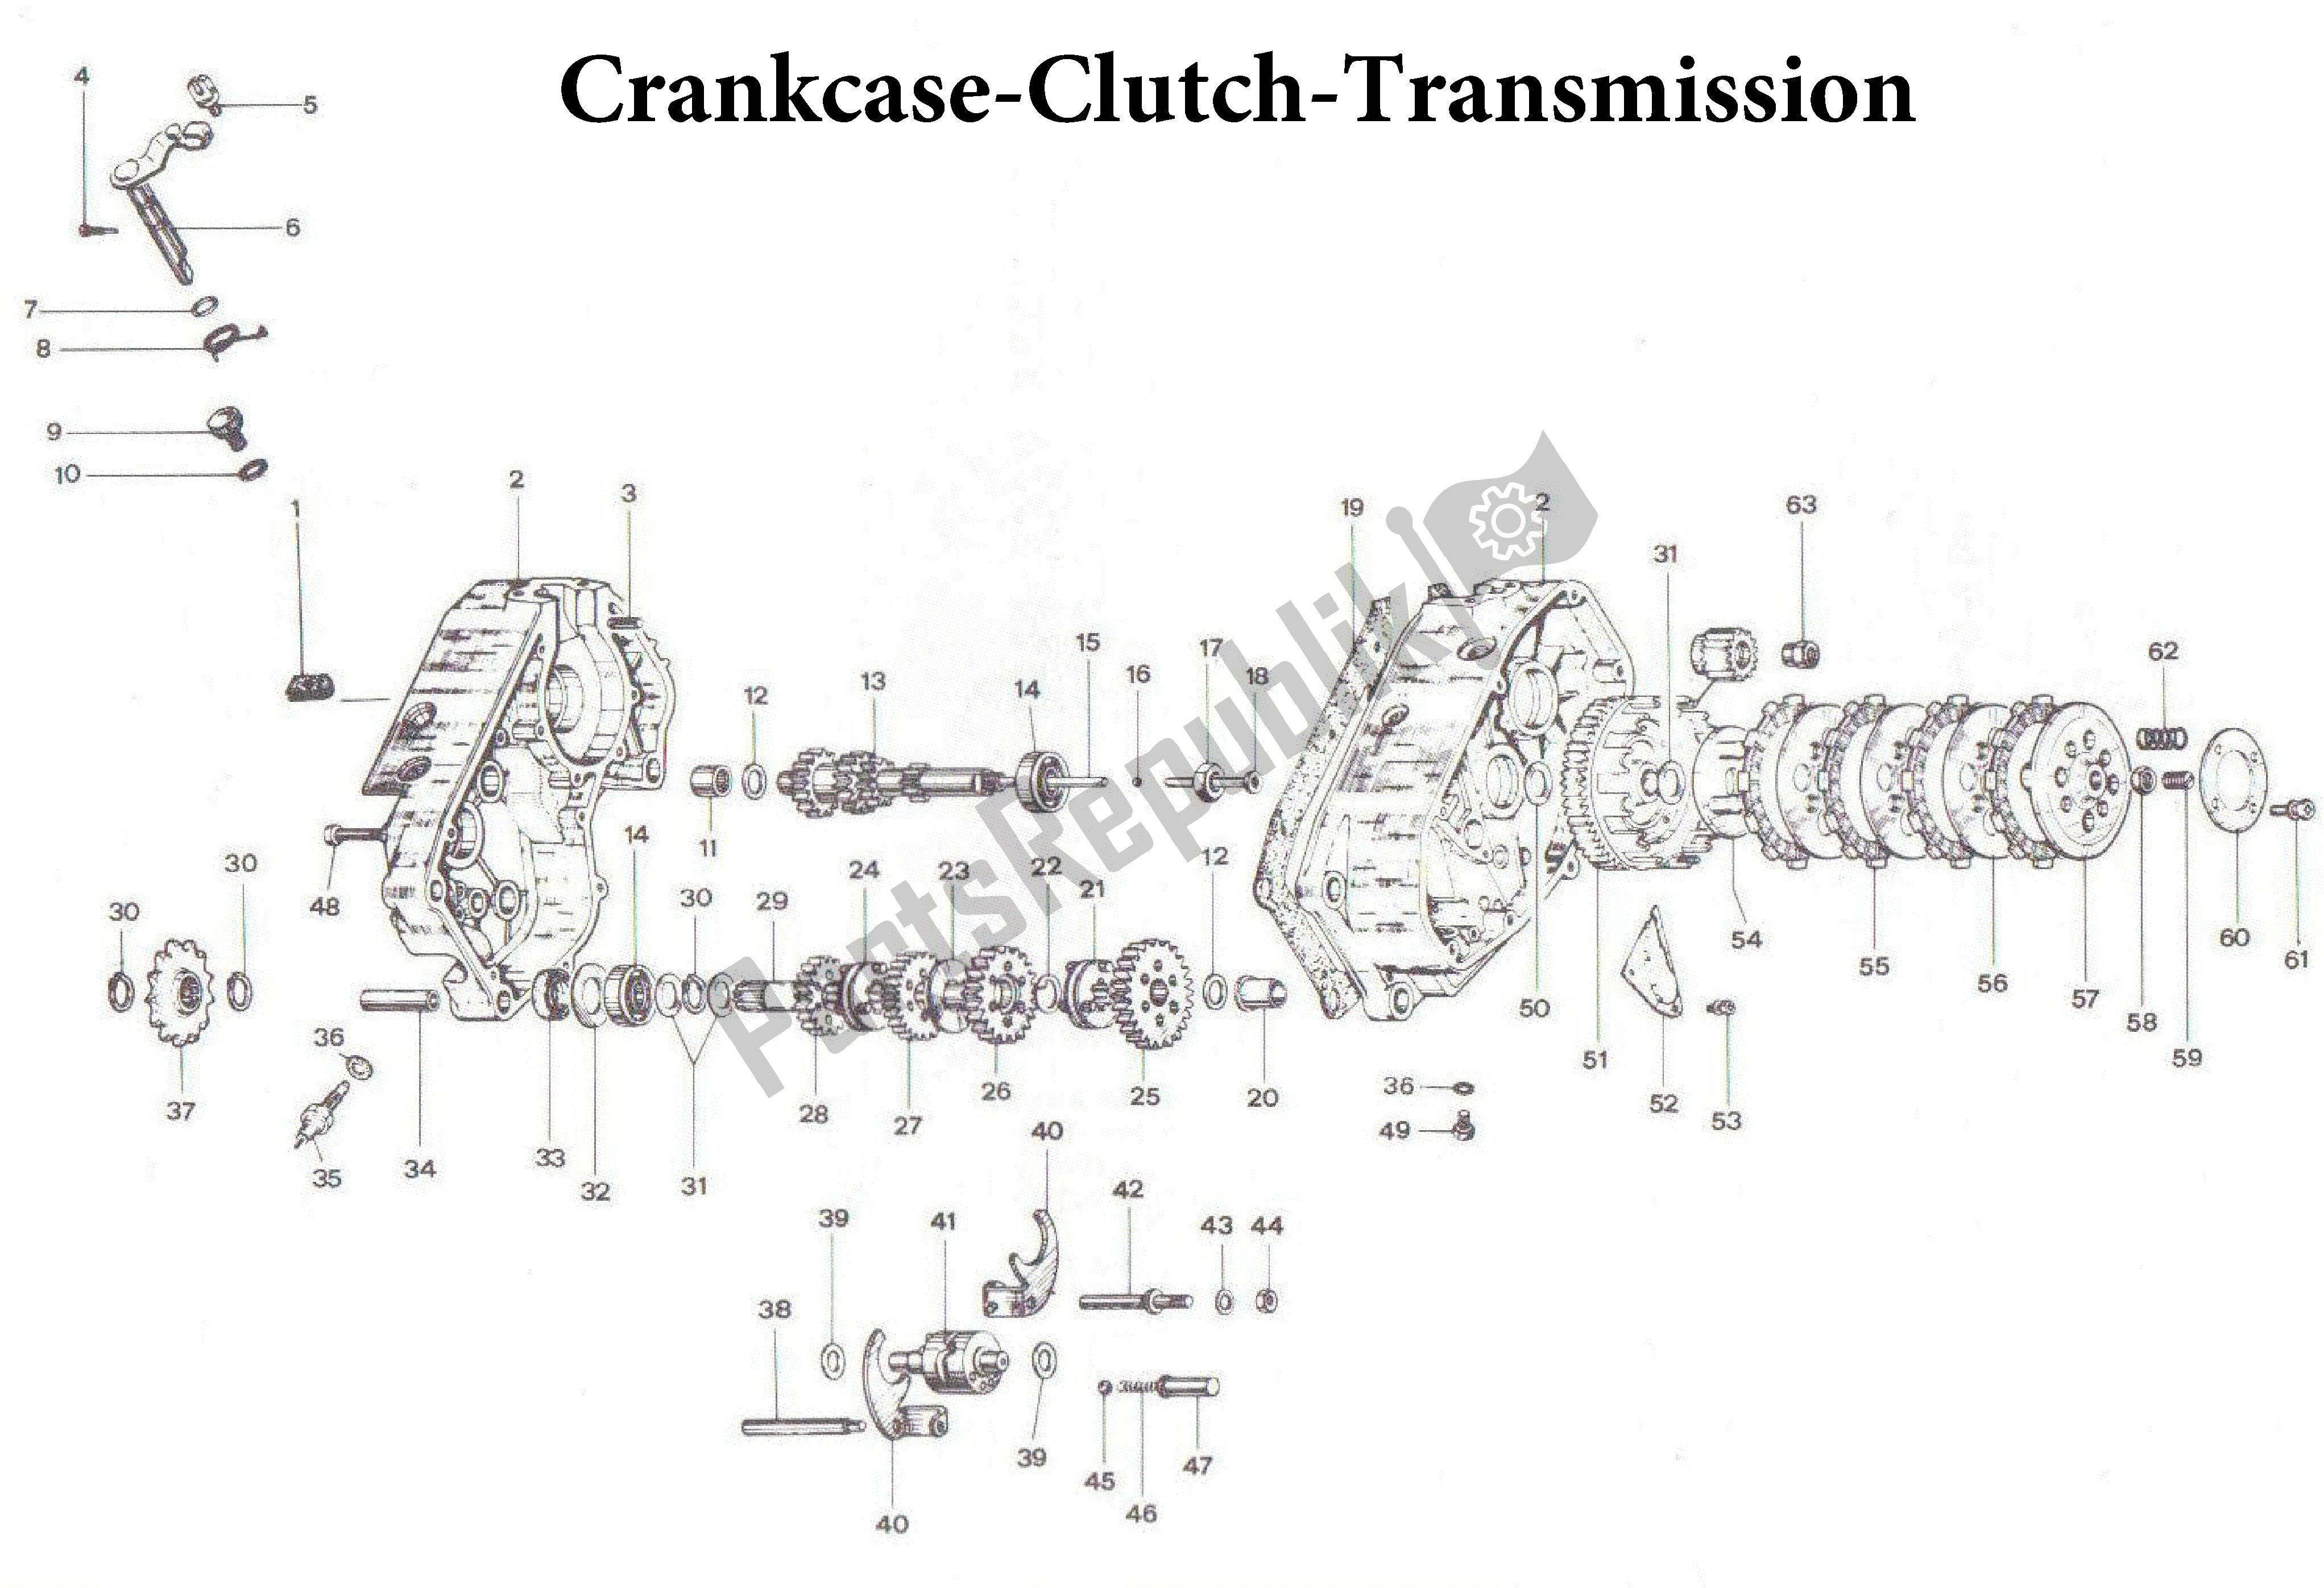 All parts for the Crankcase-clutch-transmission of the Aprilia AF1 50 1989